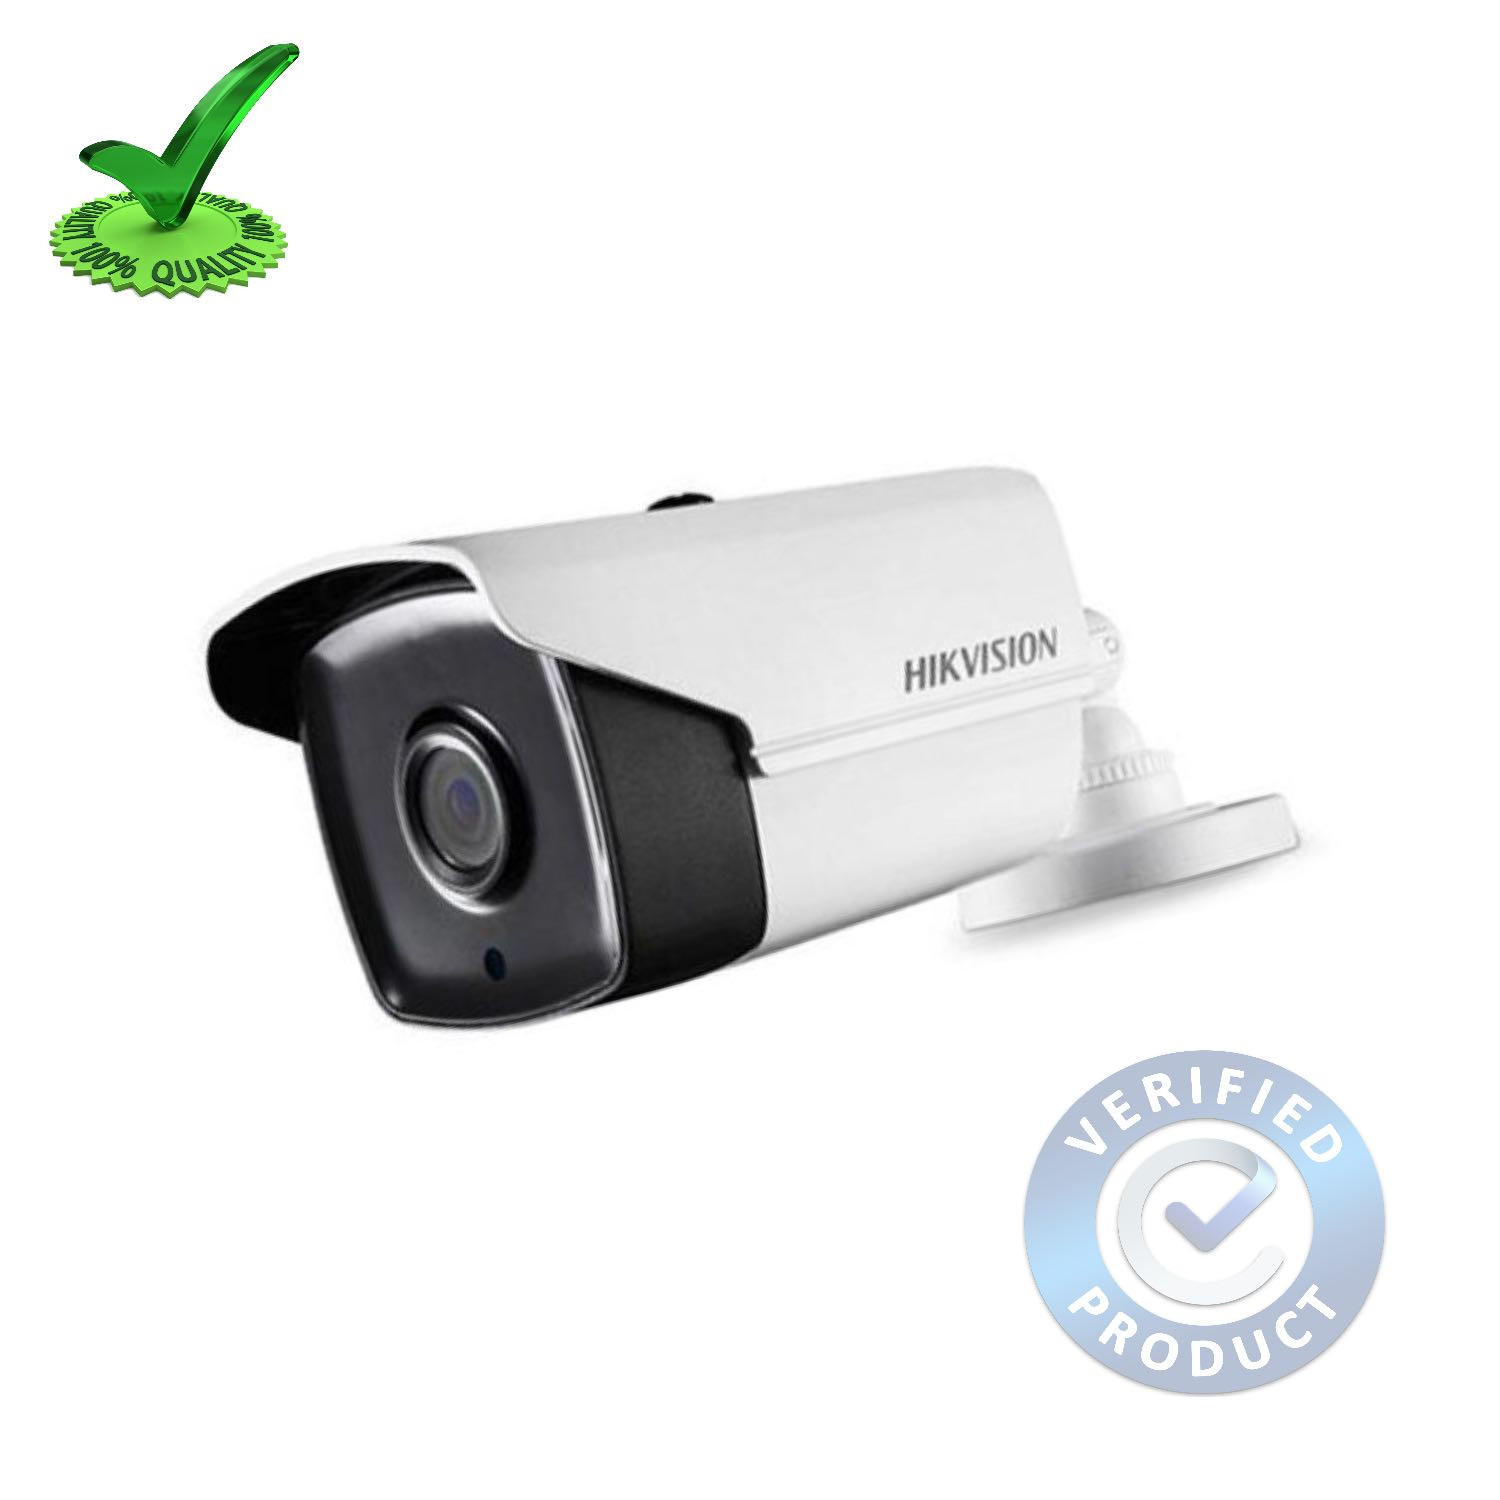 Hikvision DS-2CE1AD0T-IT5F 2MP HD Bullet Camera